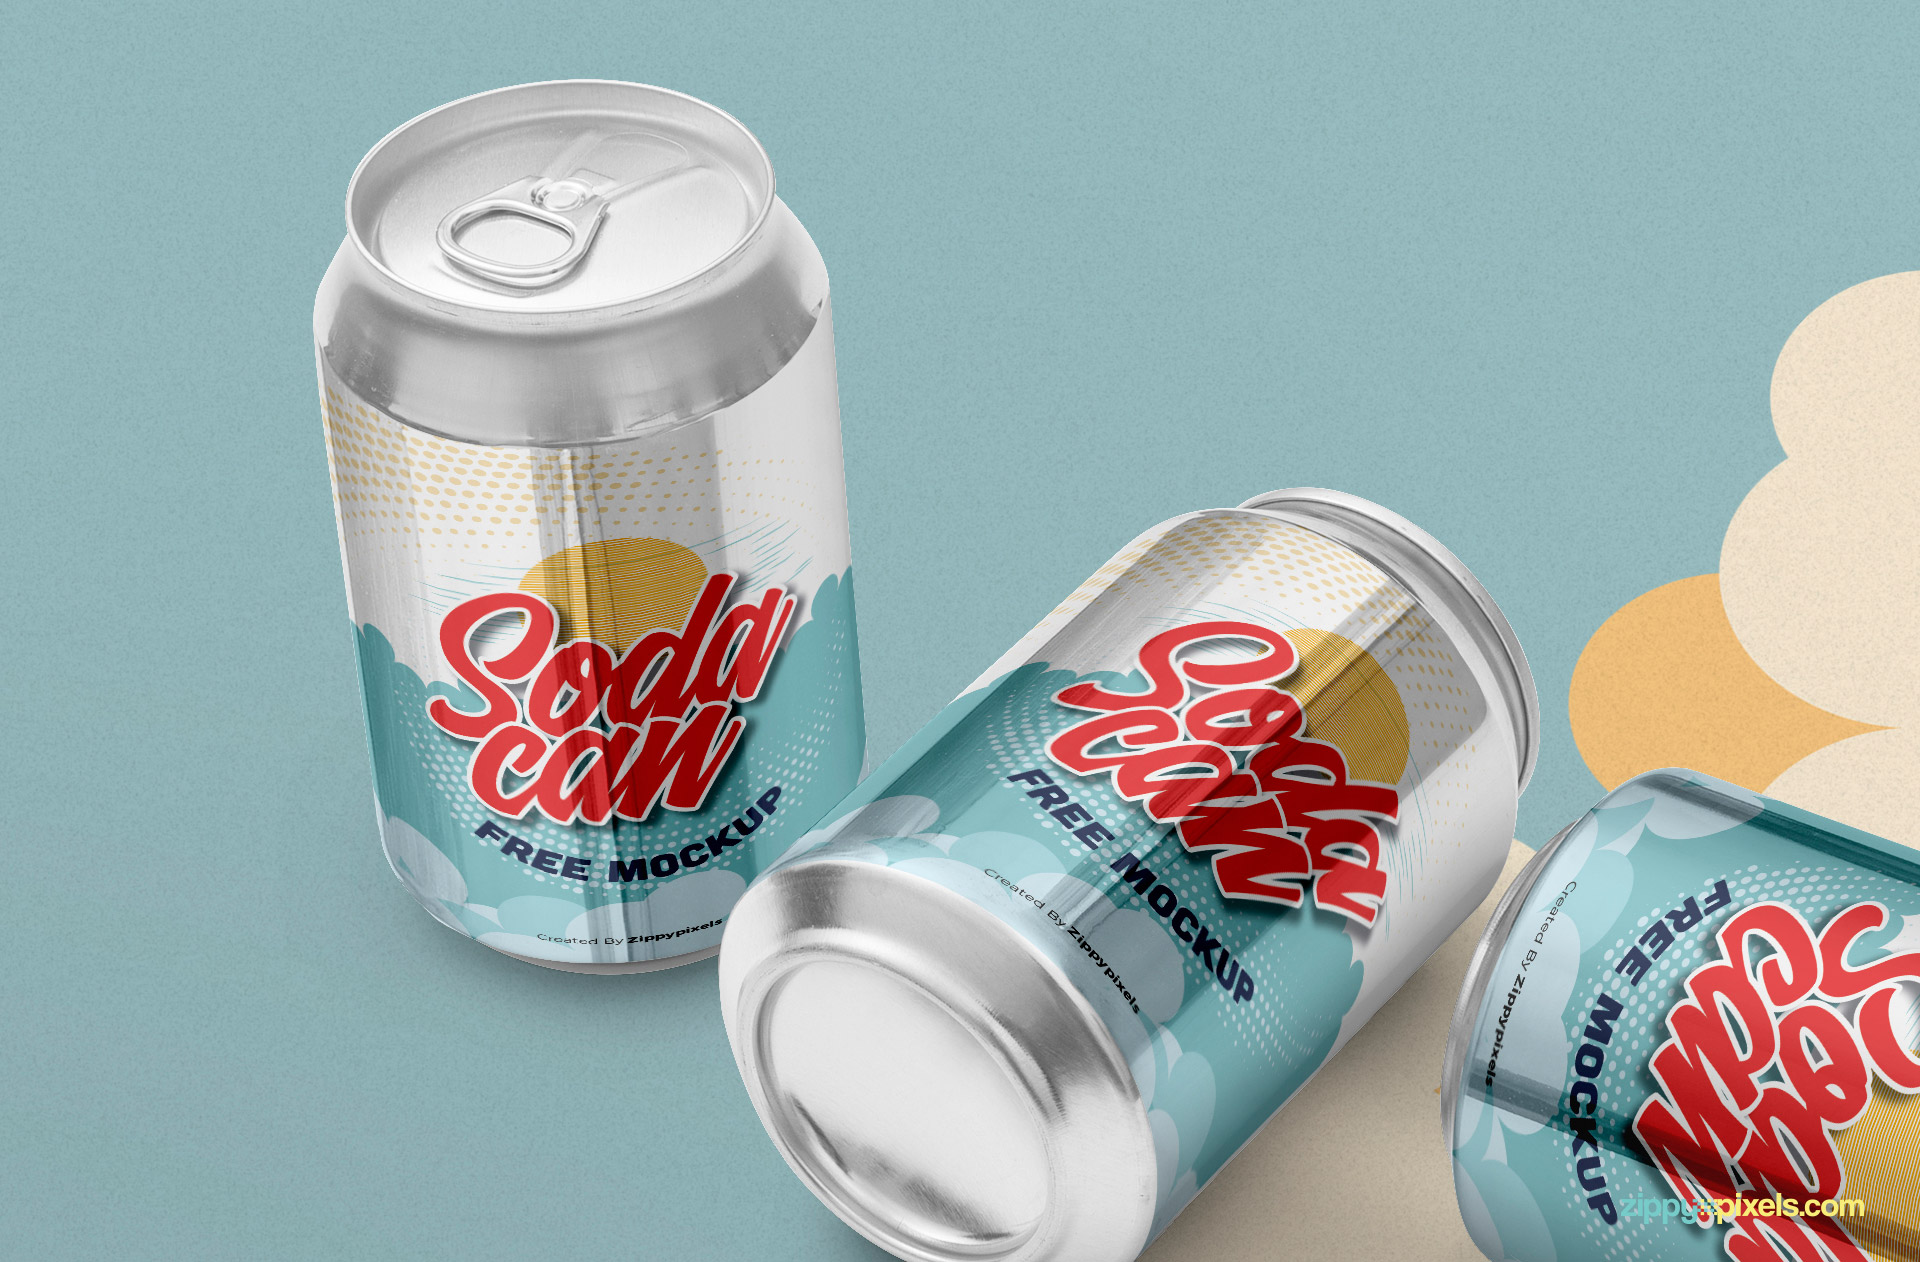 Change the colors and designs of the soda can easily.